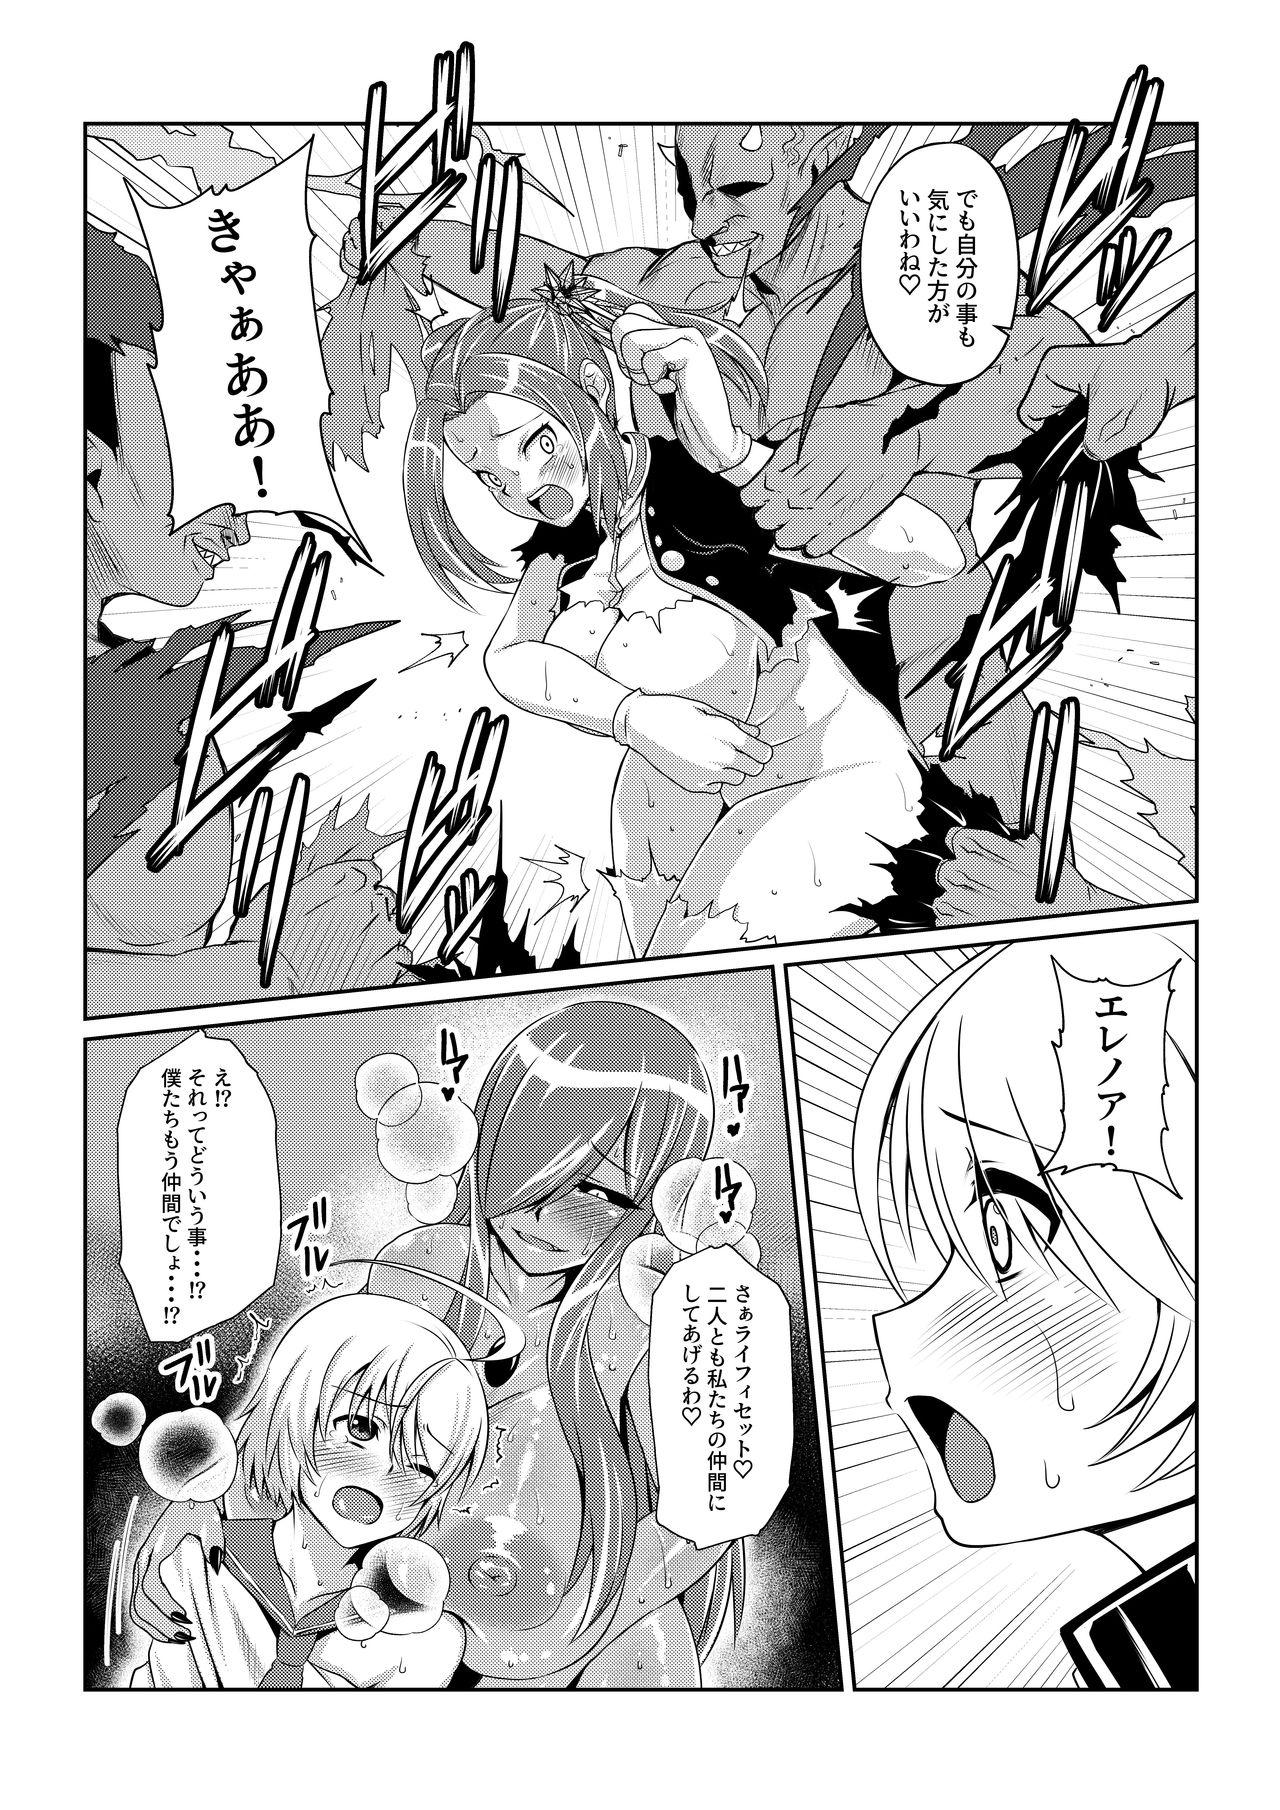 Lesbian Sex Tales Of DarkSide〜性隷〜 - Tales of Amature Porn - Page 6